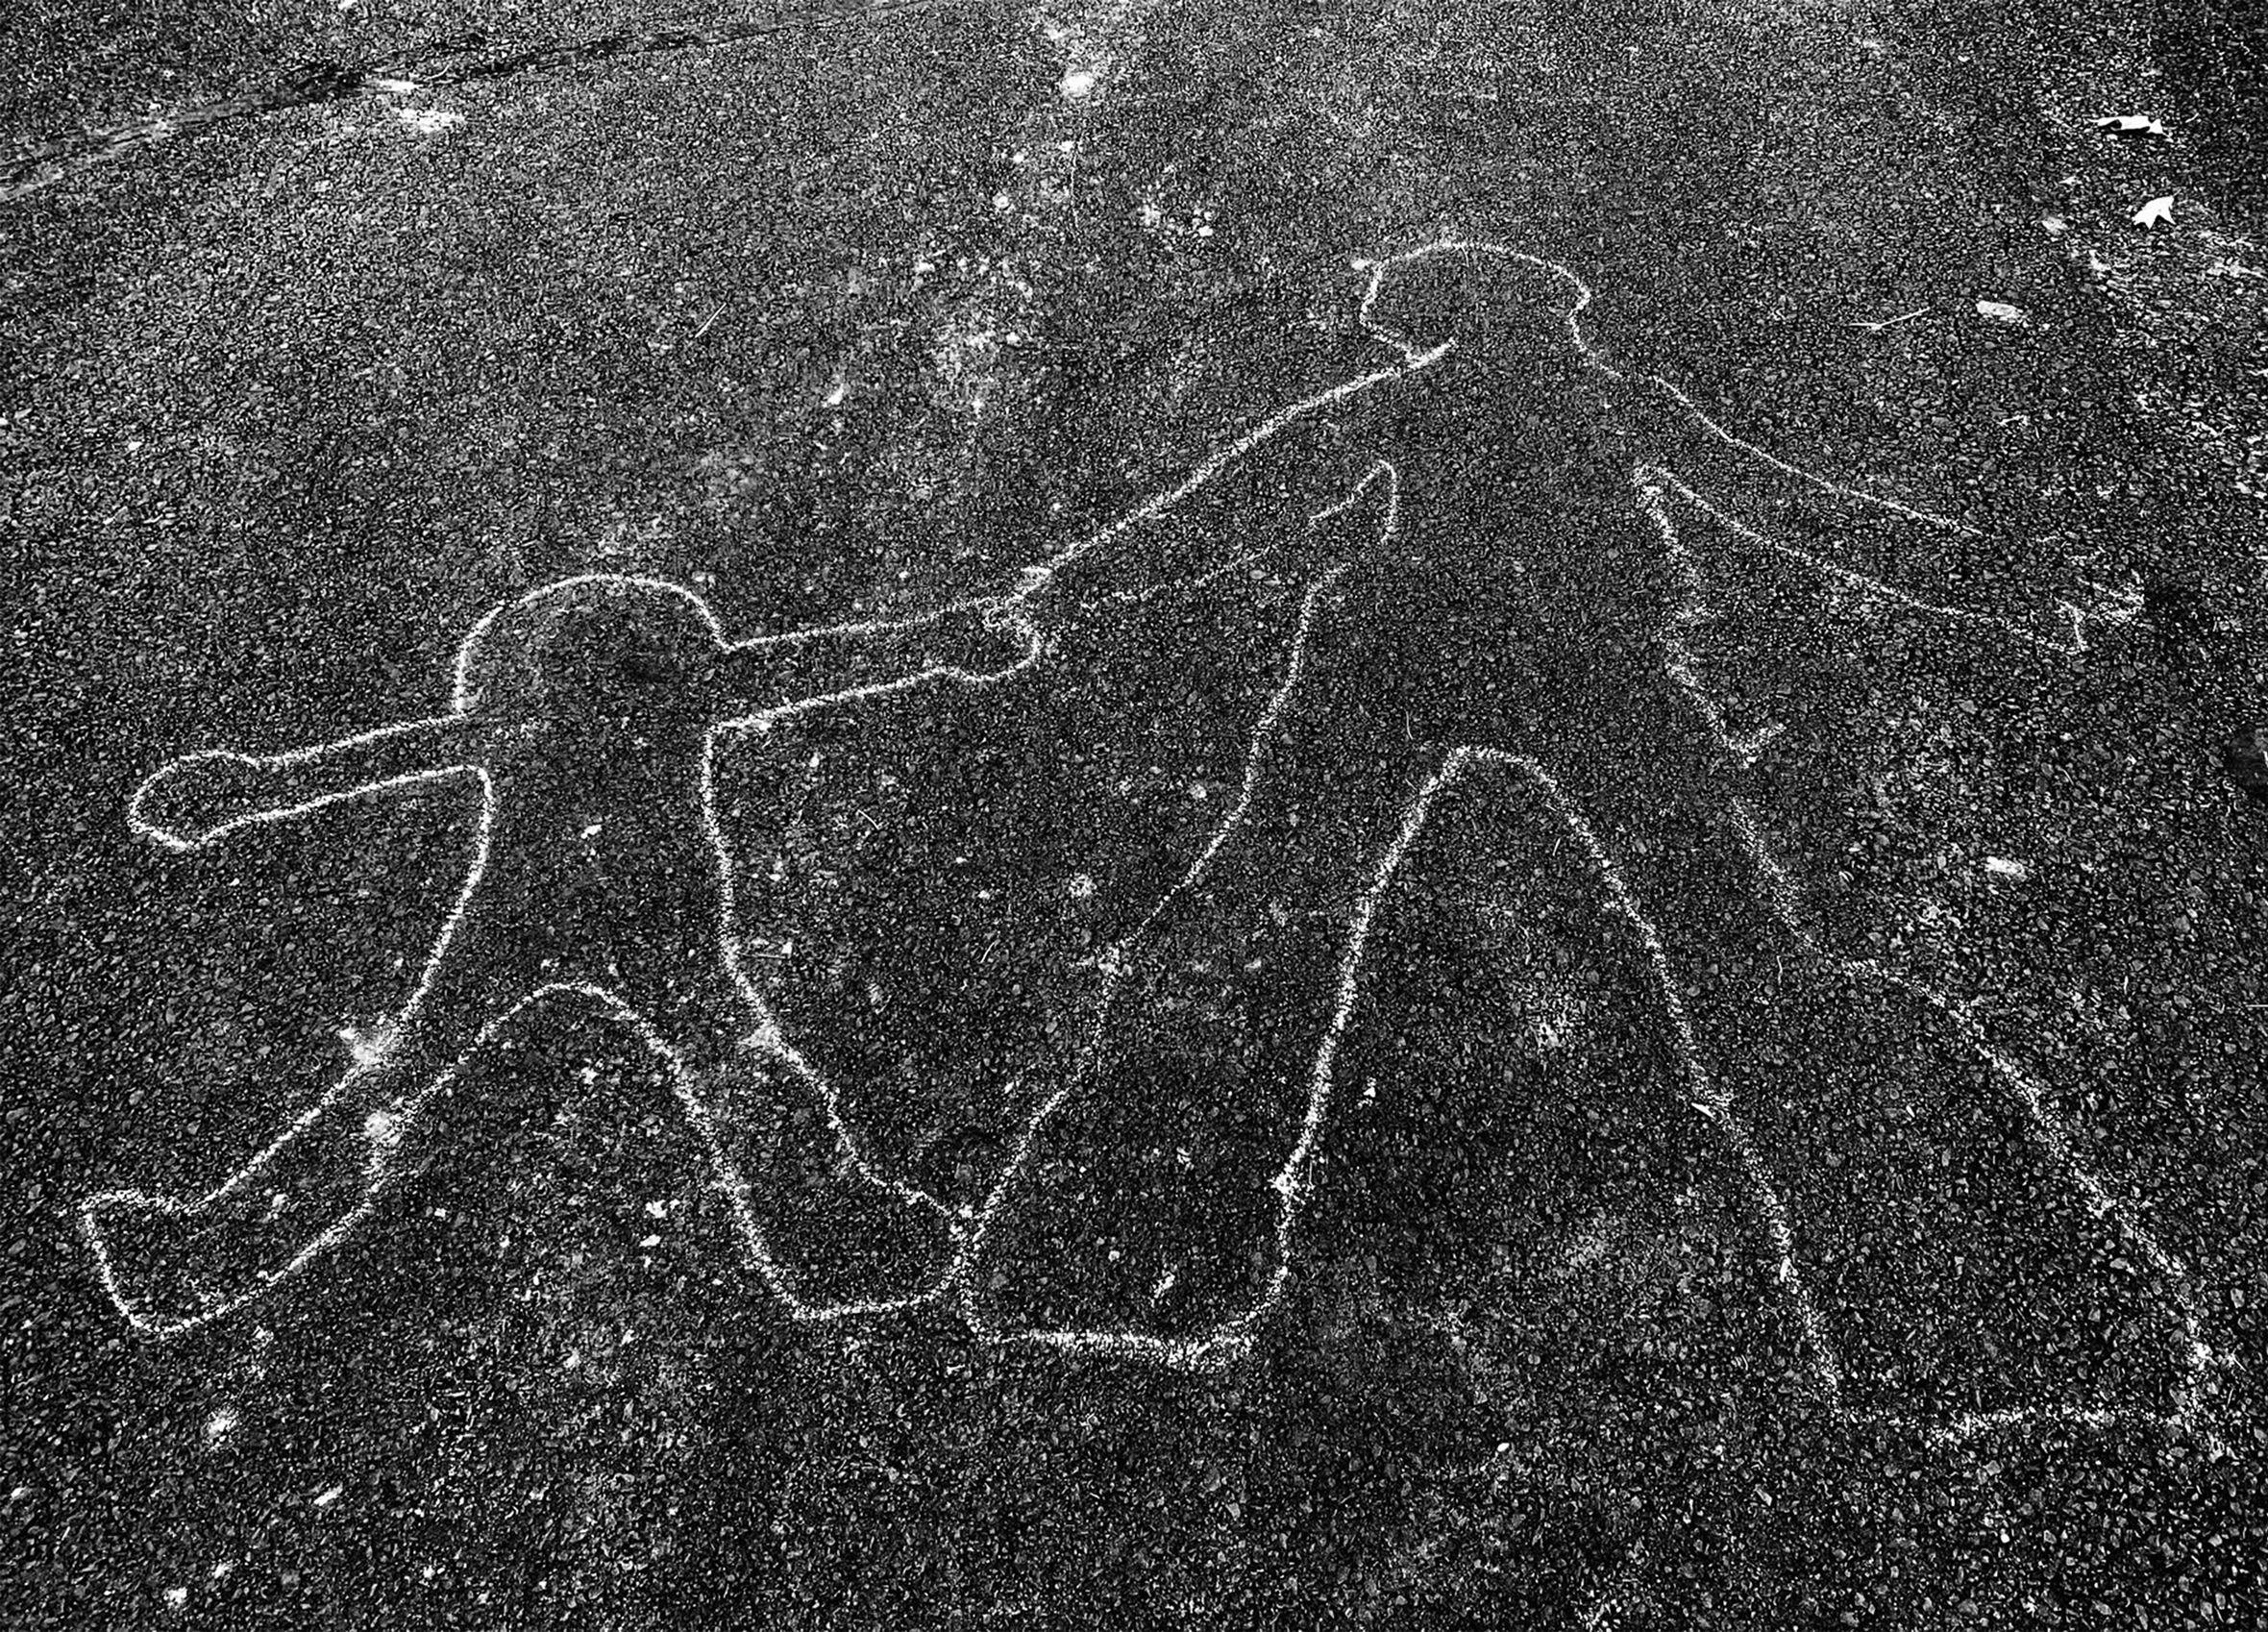 A blacktop road with a chalk outline of an adult and child walking while holding hands.